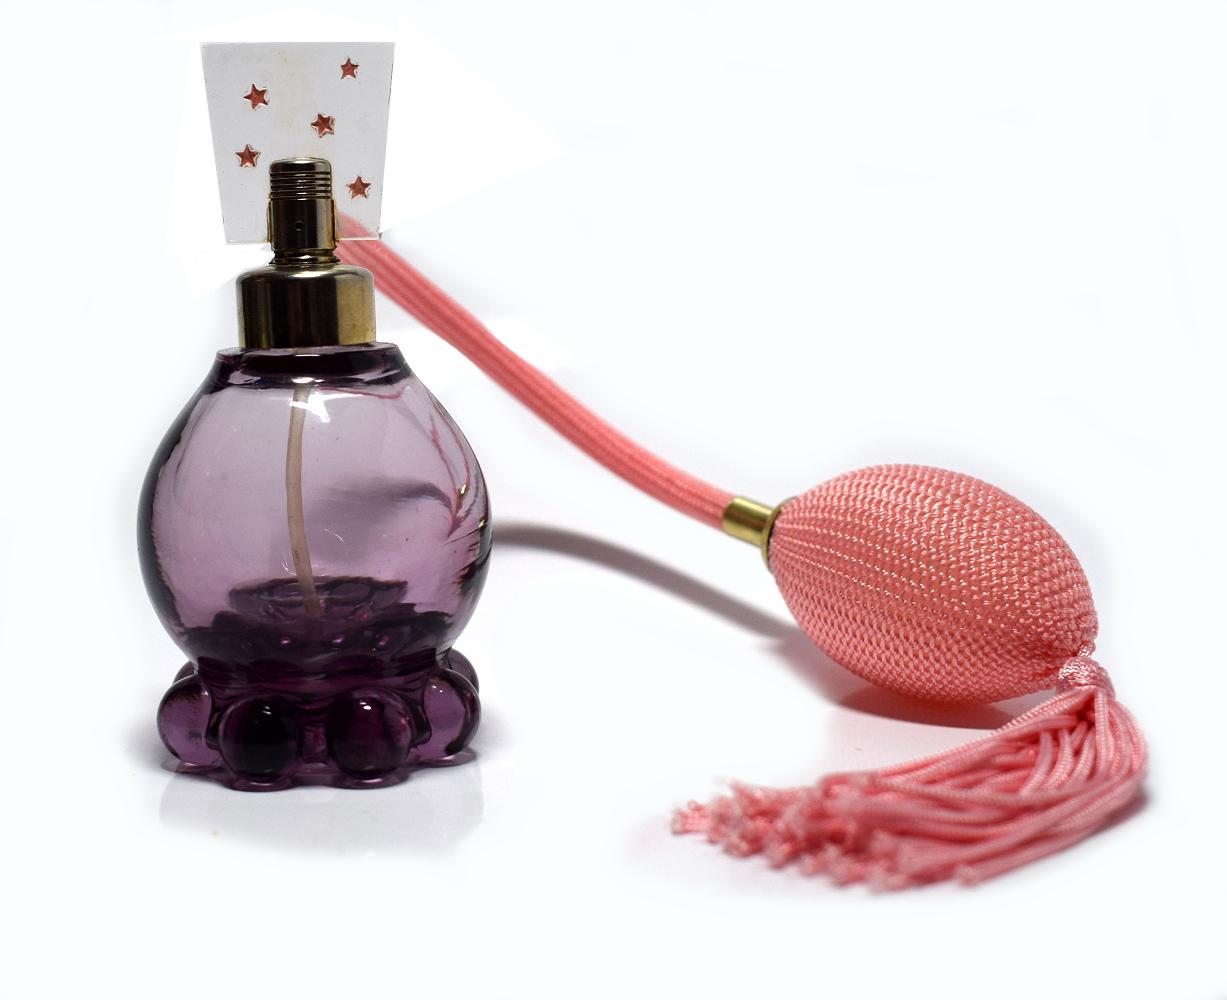 A delightful vintage 1930s amethyst glass perfume atomiser glass bottle with clear Lucite panel to the top with stars design. Very typical of the period. Gold tone metal top and pink atomiser bulb/puffer with tassel all in working order and super